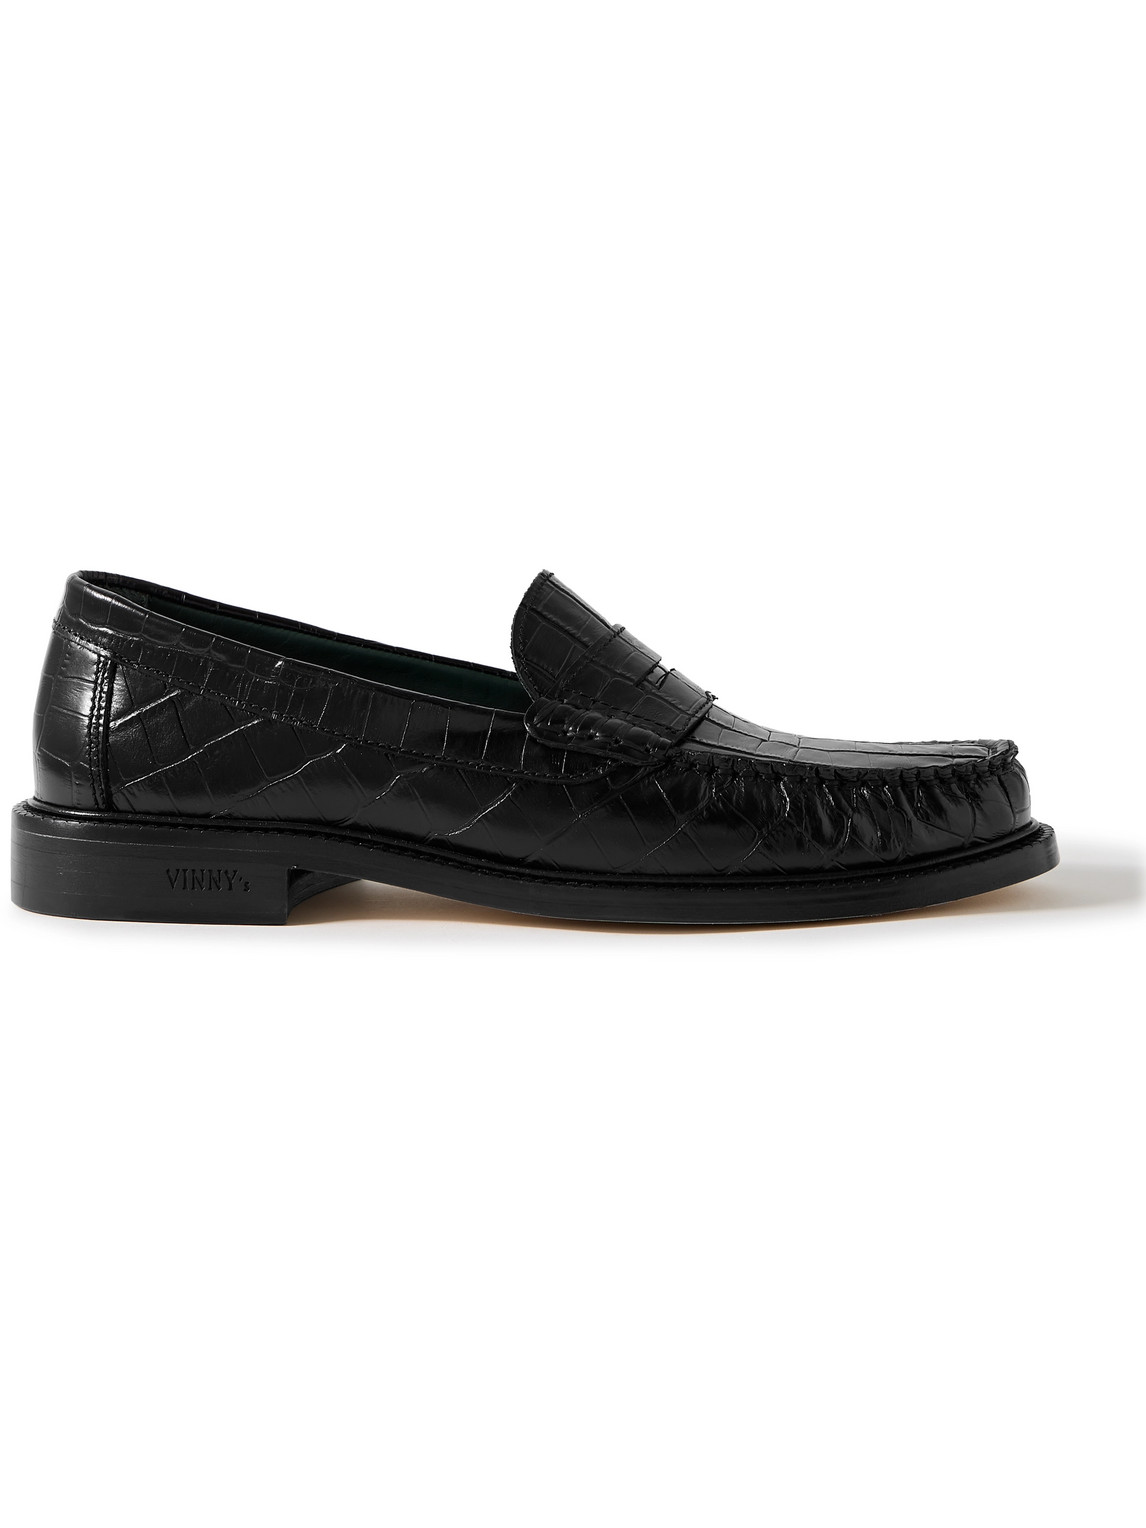 Yardee Croc-Effect Leather Penny Loafers